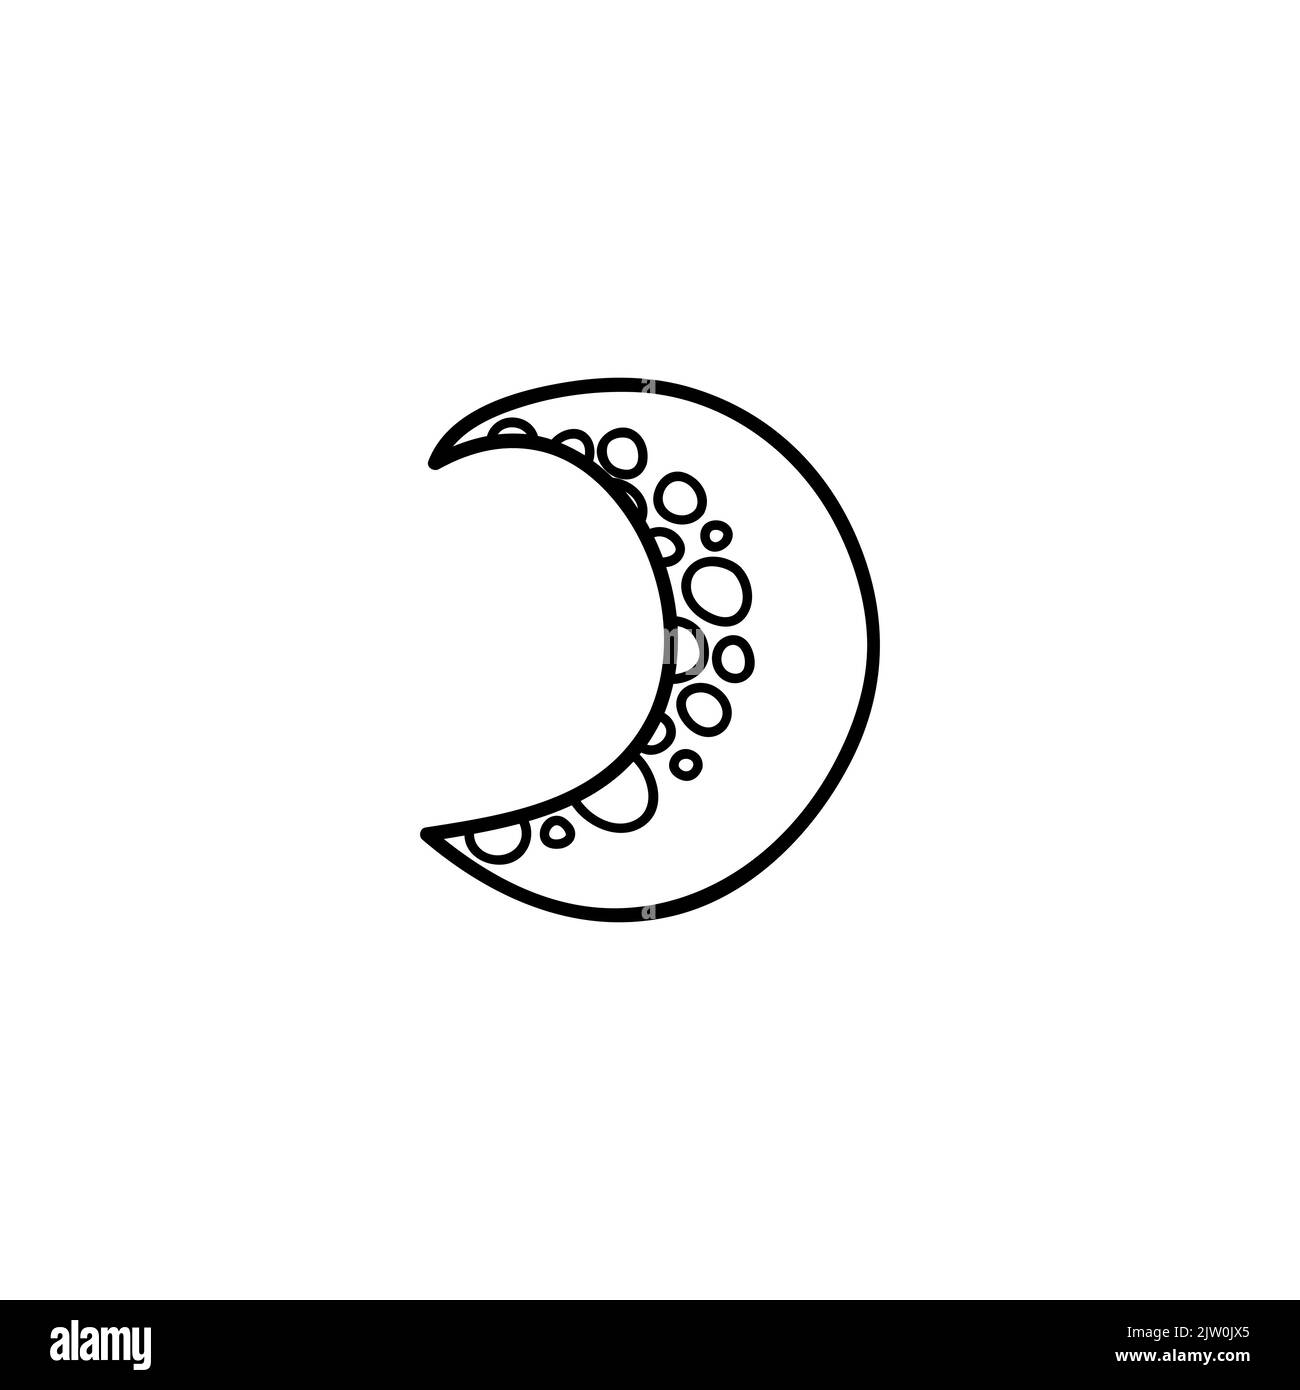 Doodle outline moon icon isolated on white background. Stock Vector